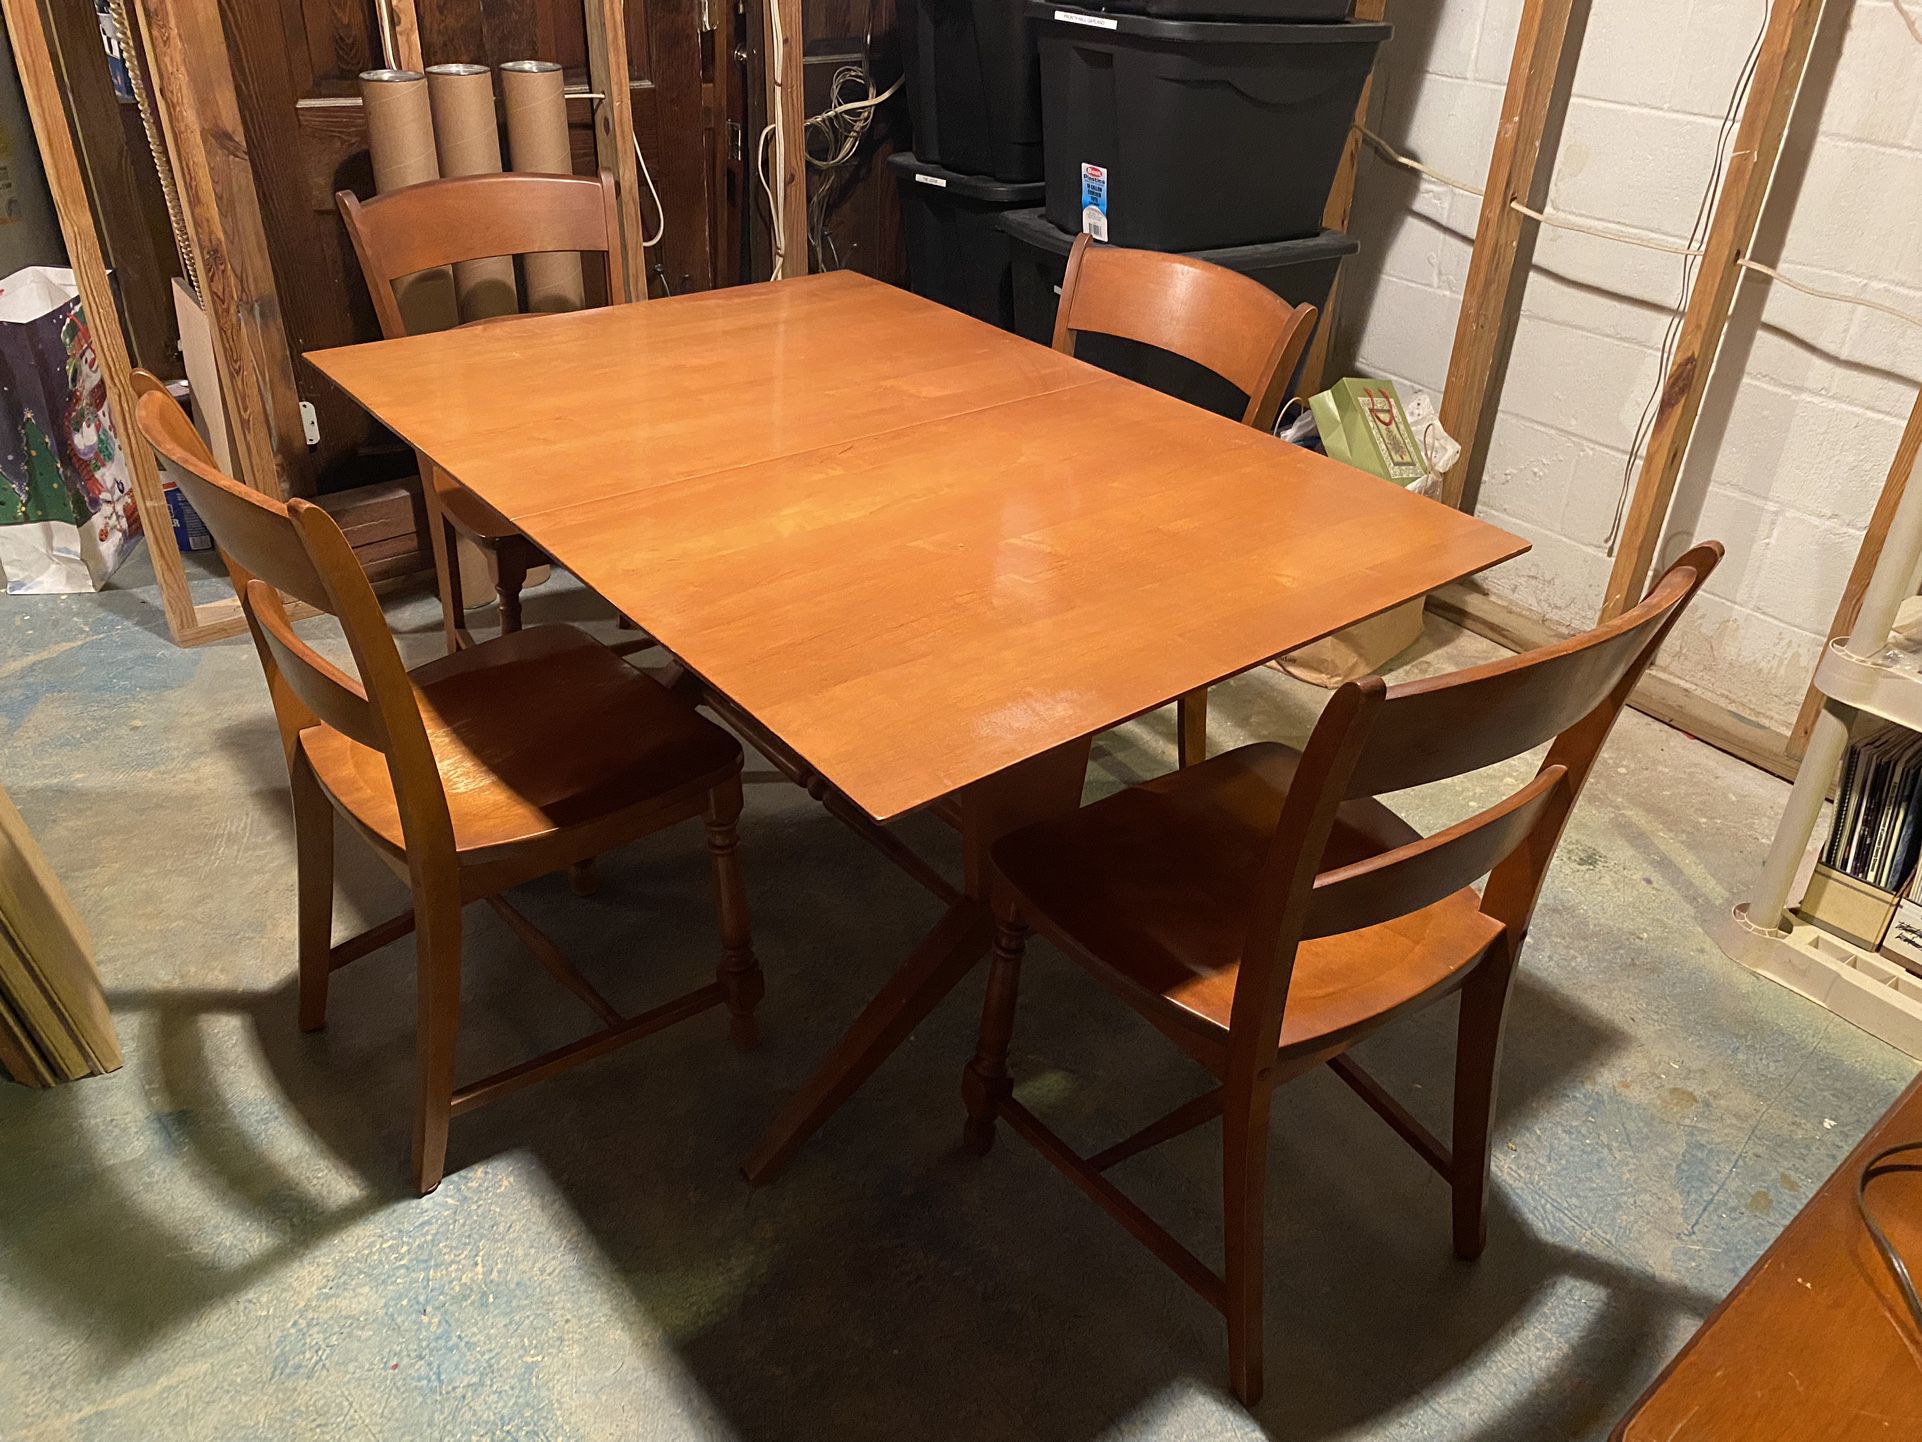 Kitchen Table W/ 4 Chairs